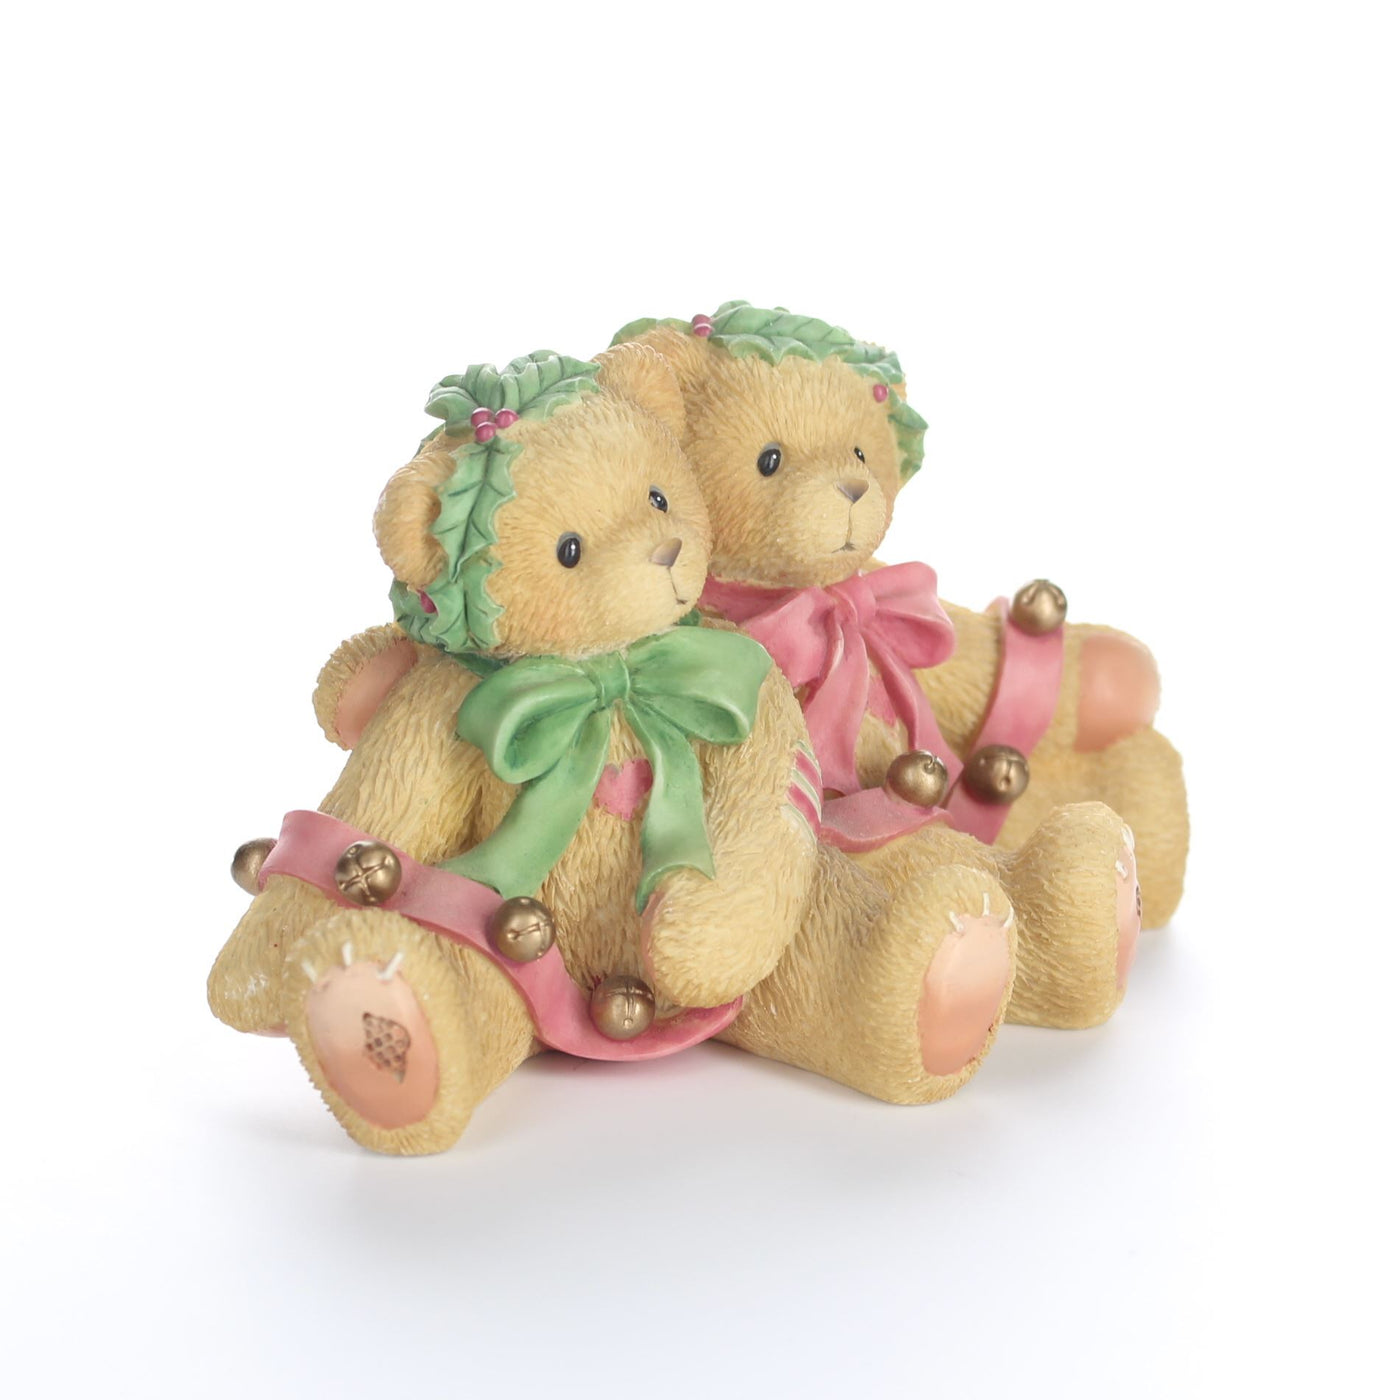 Cherished Teddies Vintage Christmas Figurine Ring In The Holidays With Me 1998